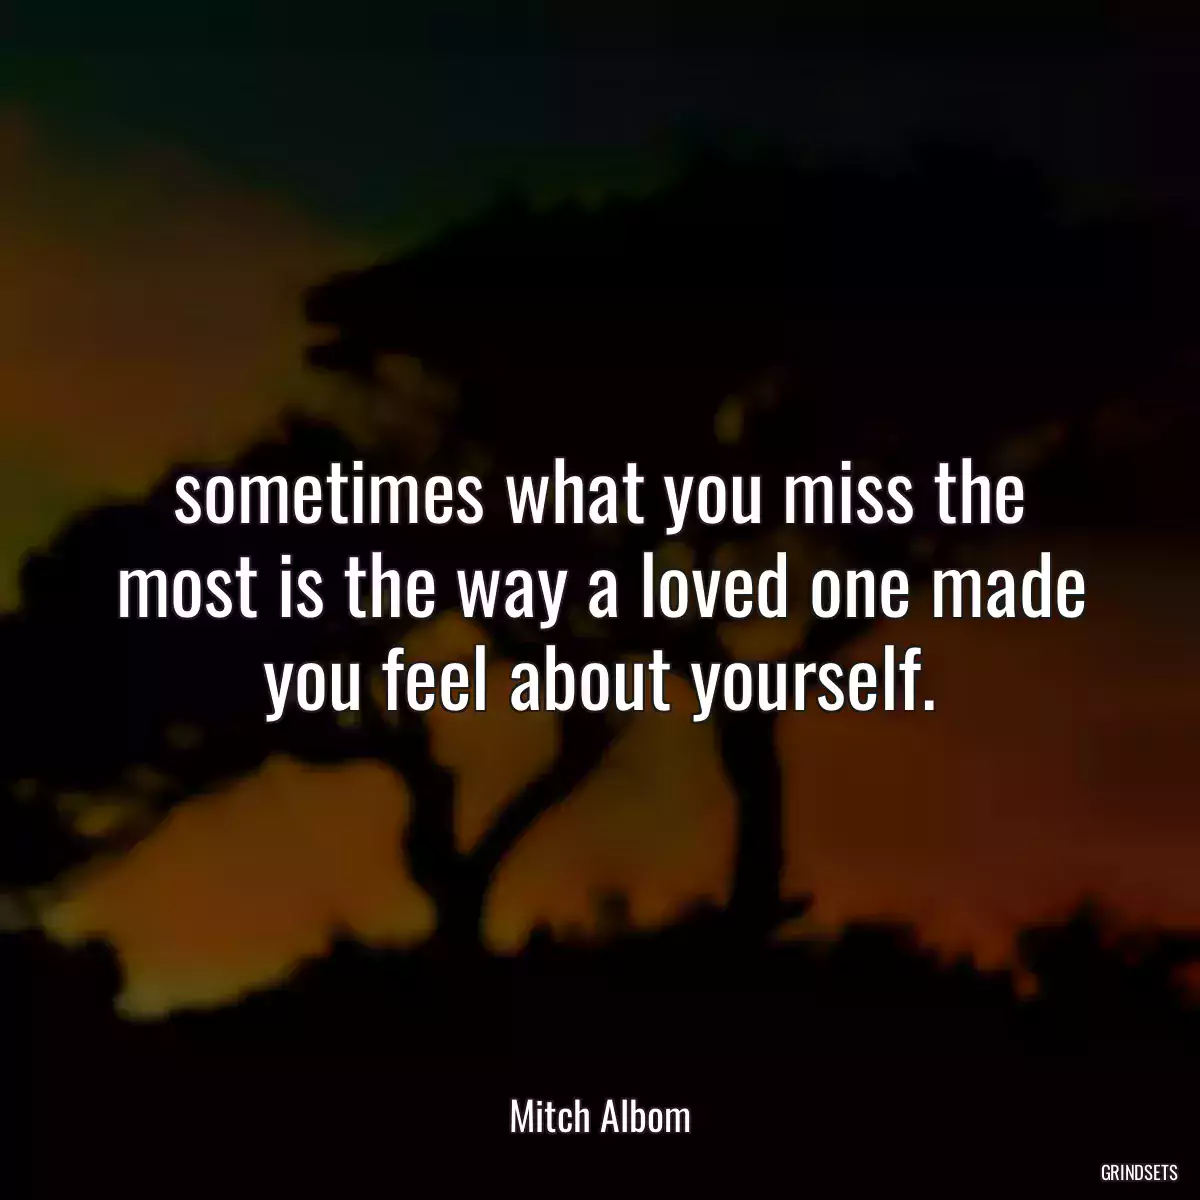 sometimes what you miss the most is the way a loved one made you feel about yourself.